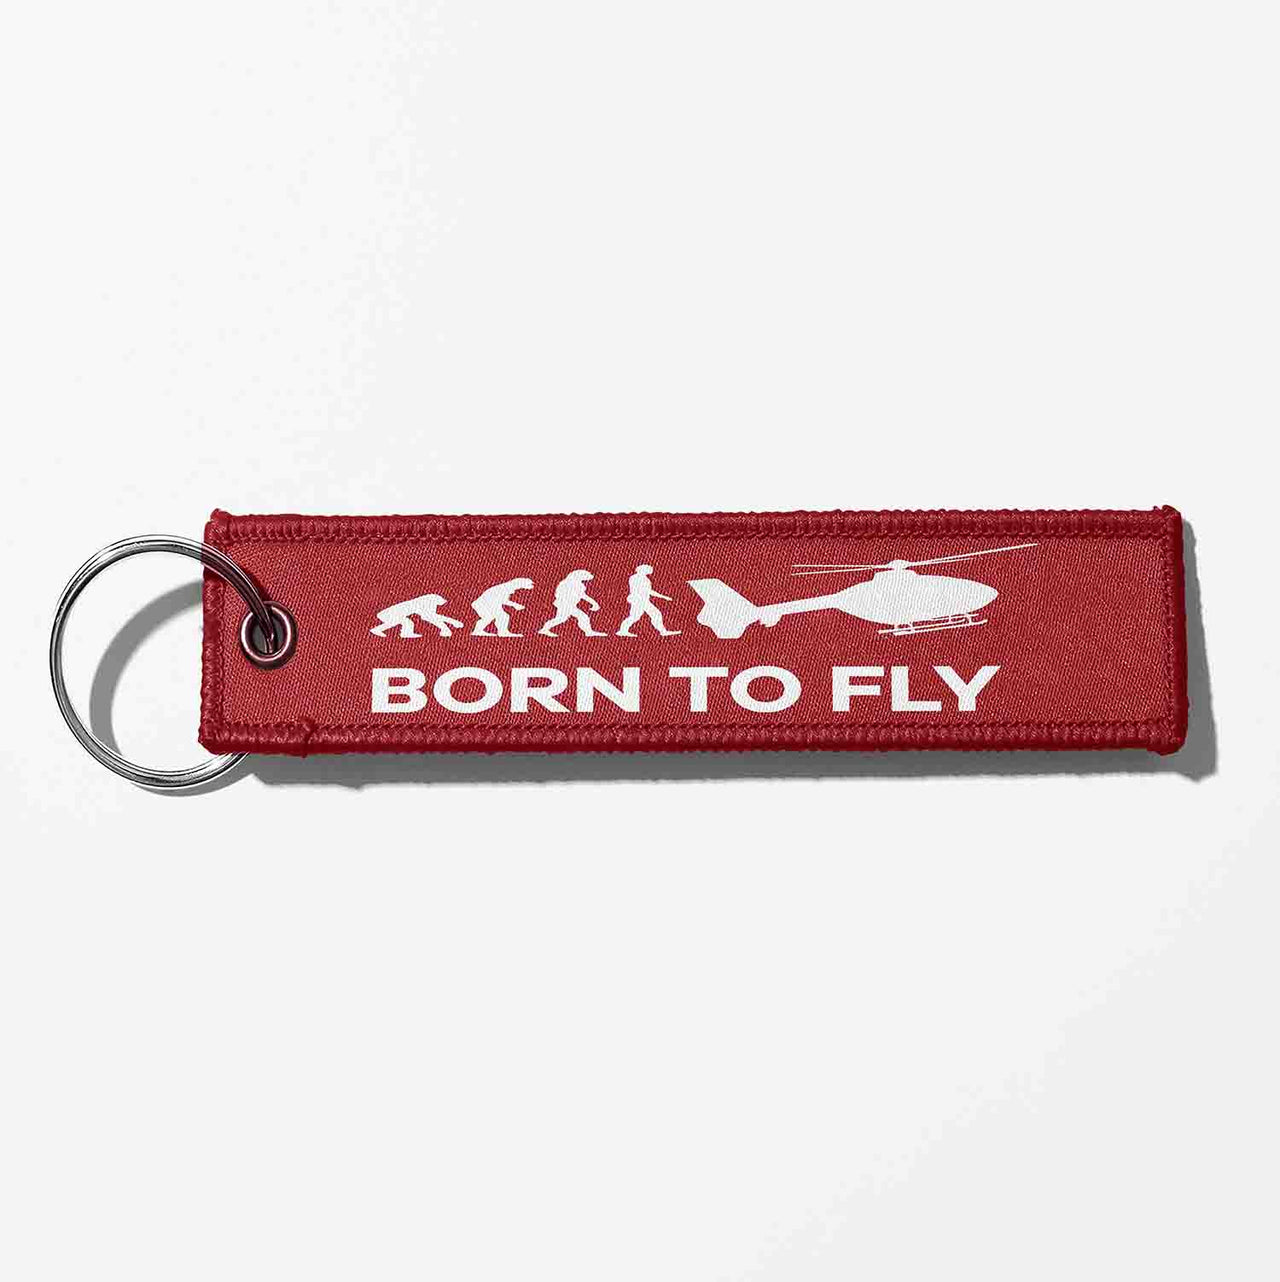 Born To Fly (Helicopter) Designed Key Chains